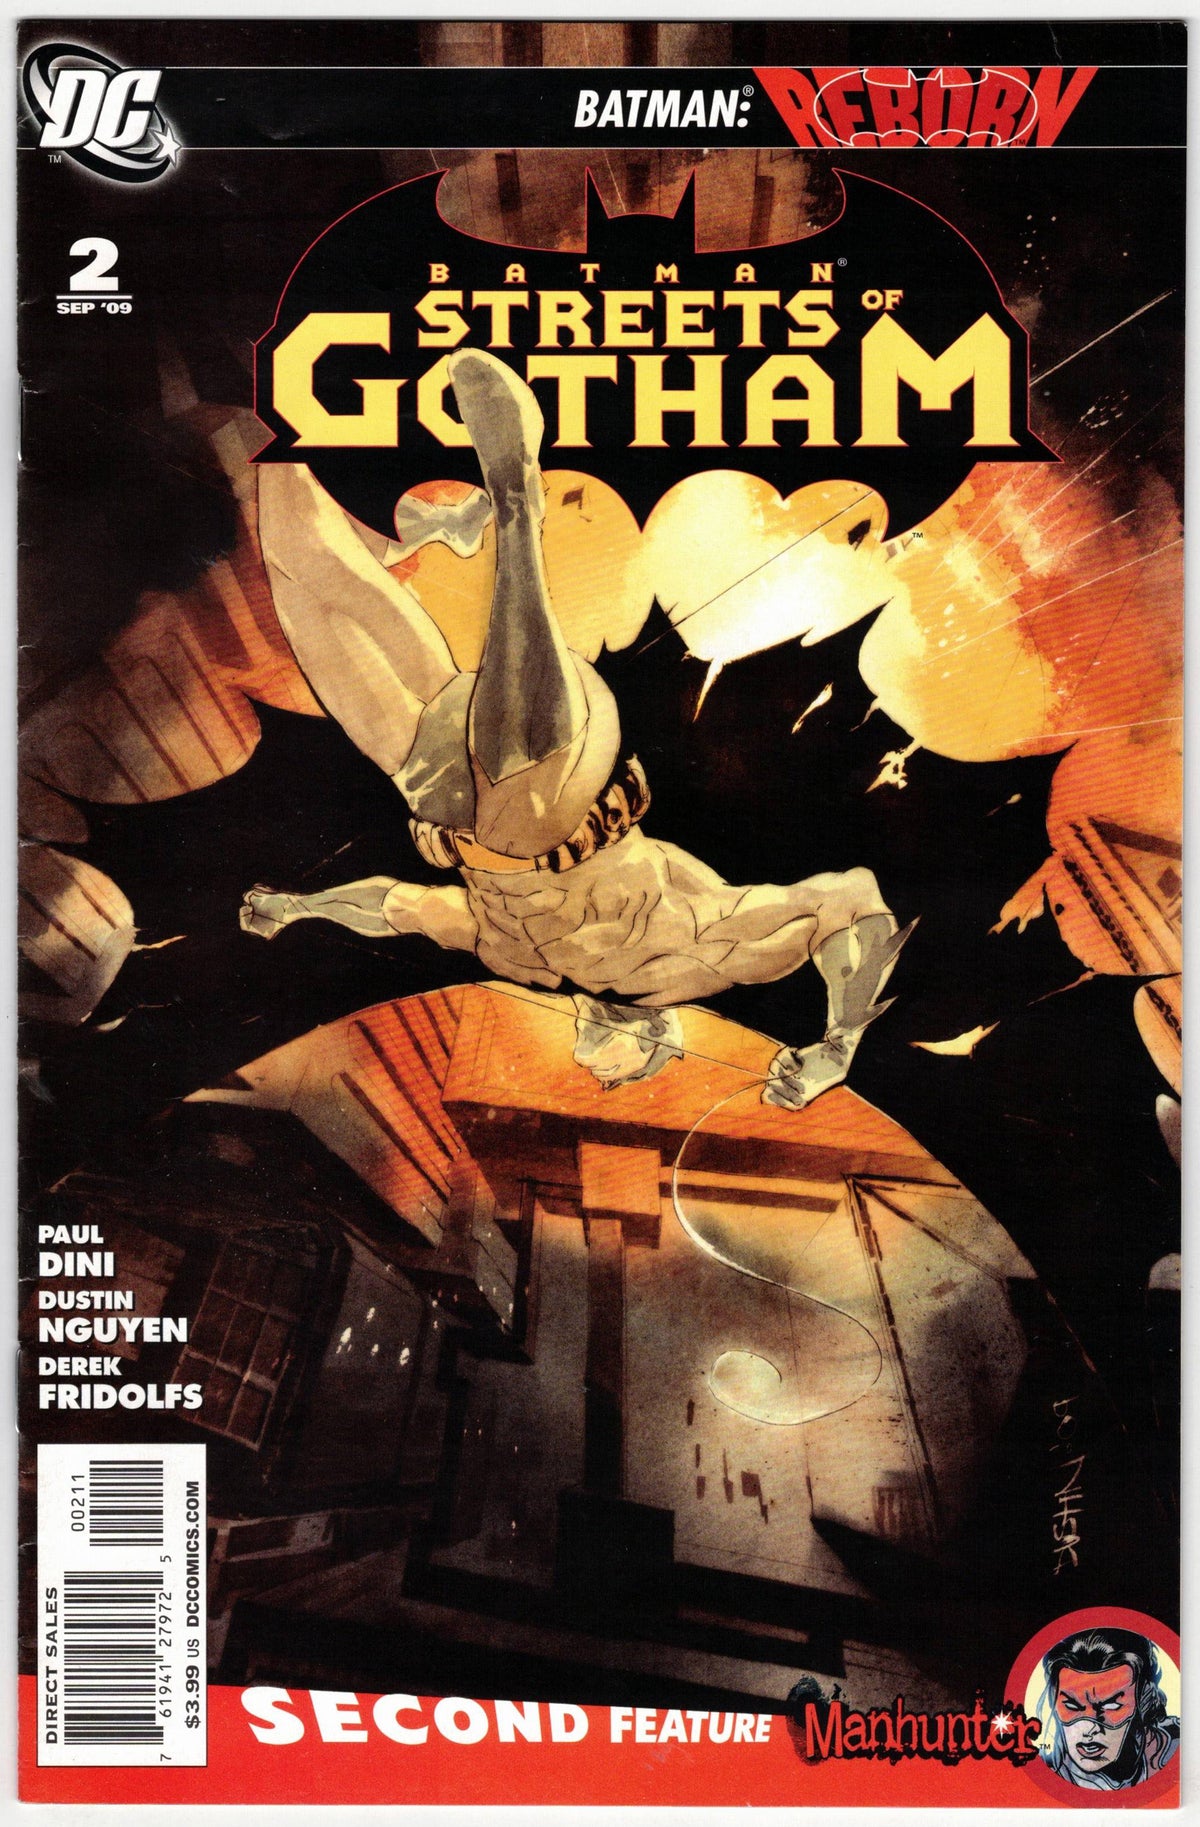 Photo of Batman: Streets of Gotham (2009) Issue 2 - Very Fine Key: 1st App: Jane Doe w/o disguise, skinless Comic sold by Stronghold Collectibles